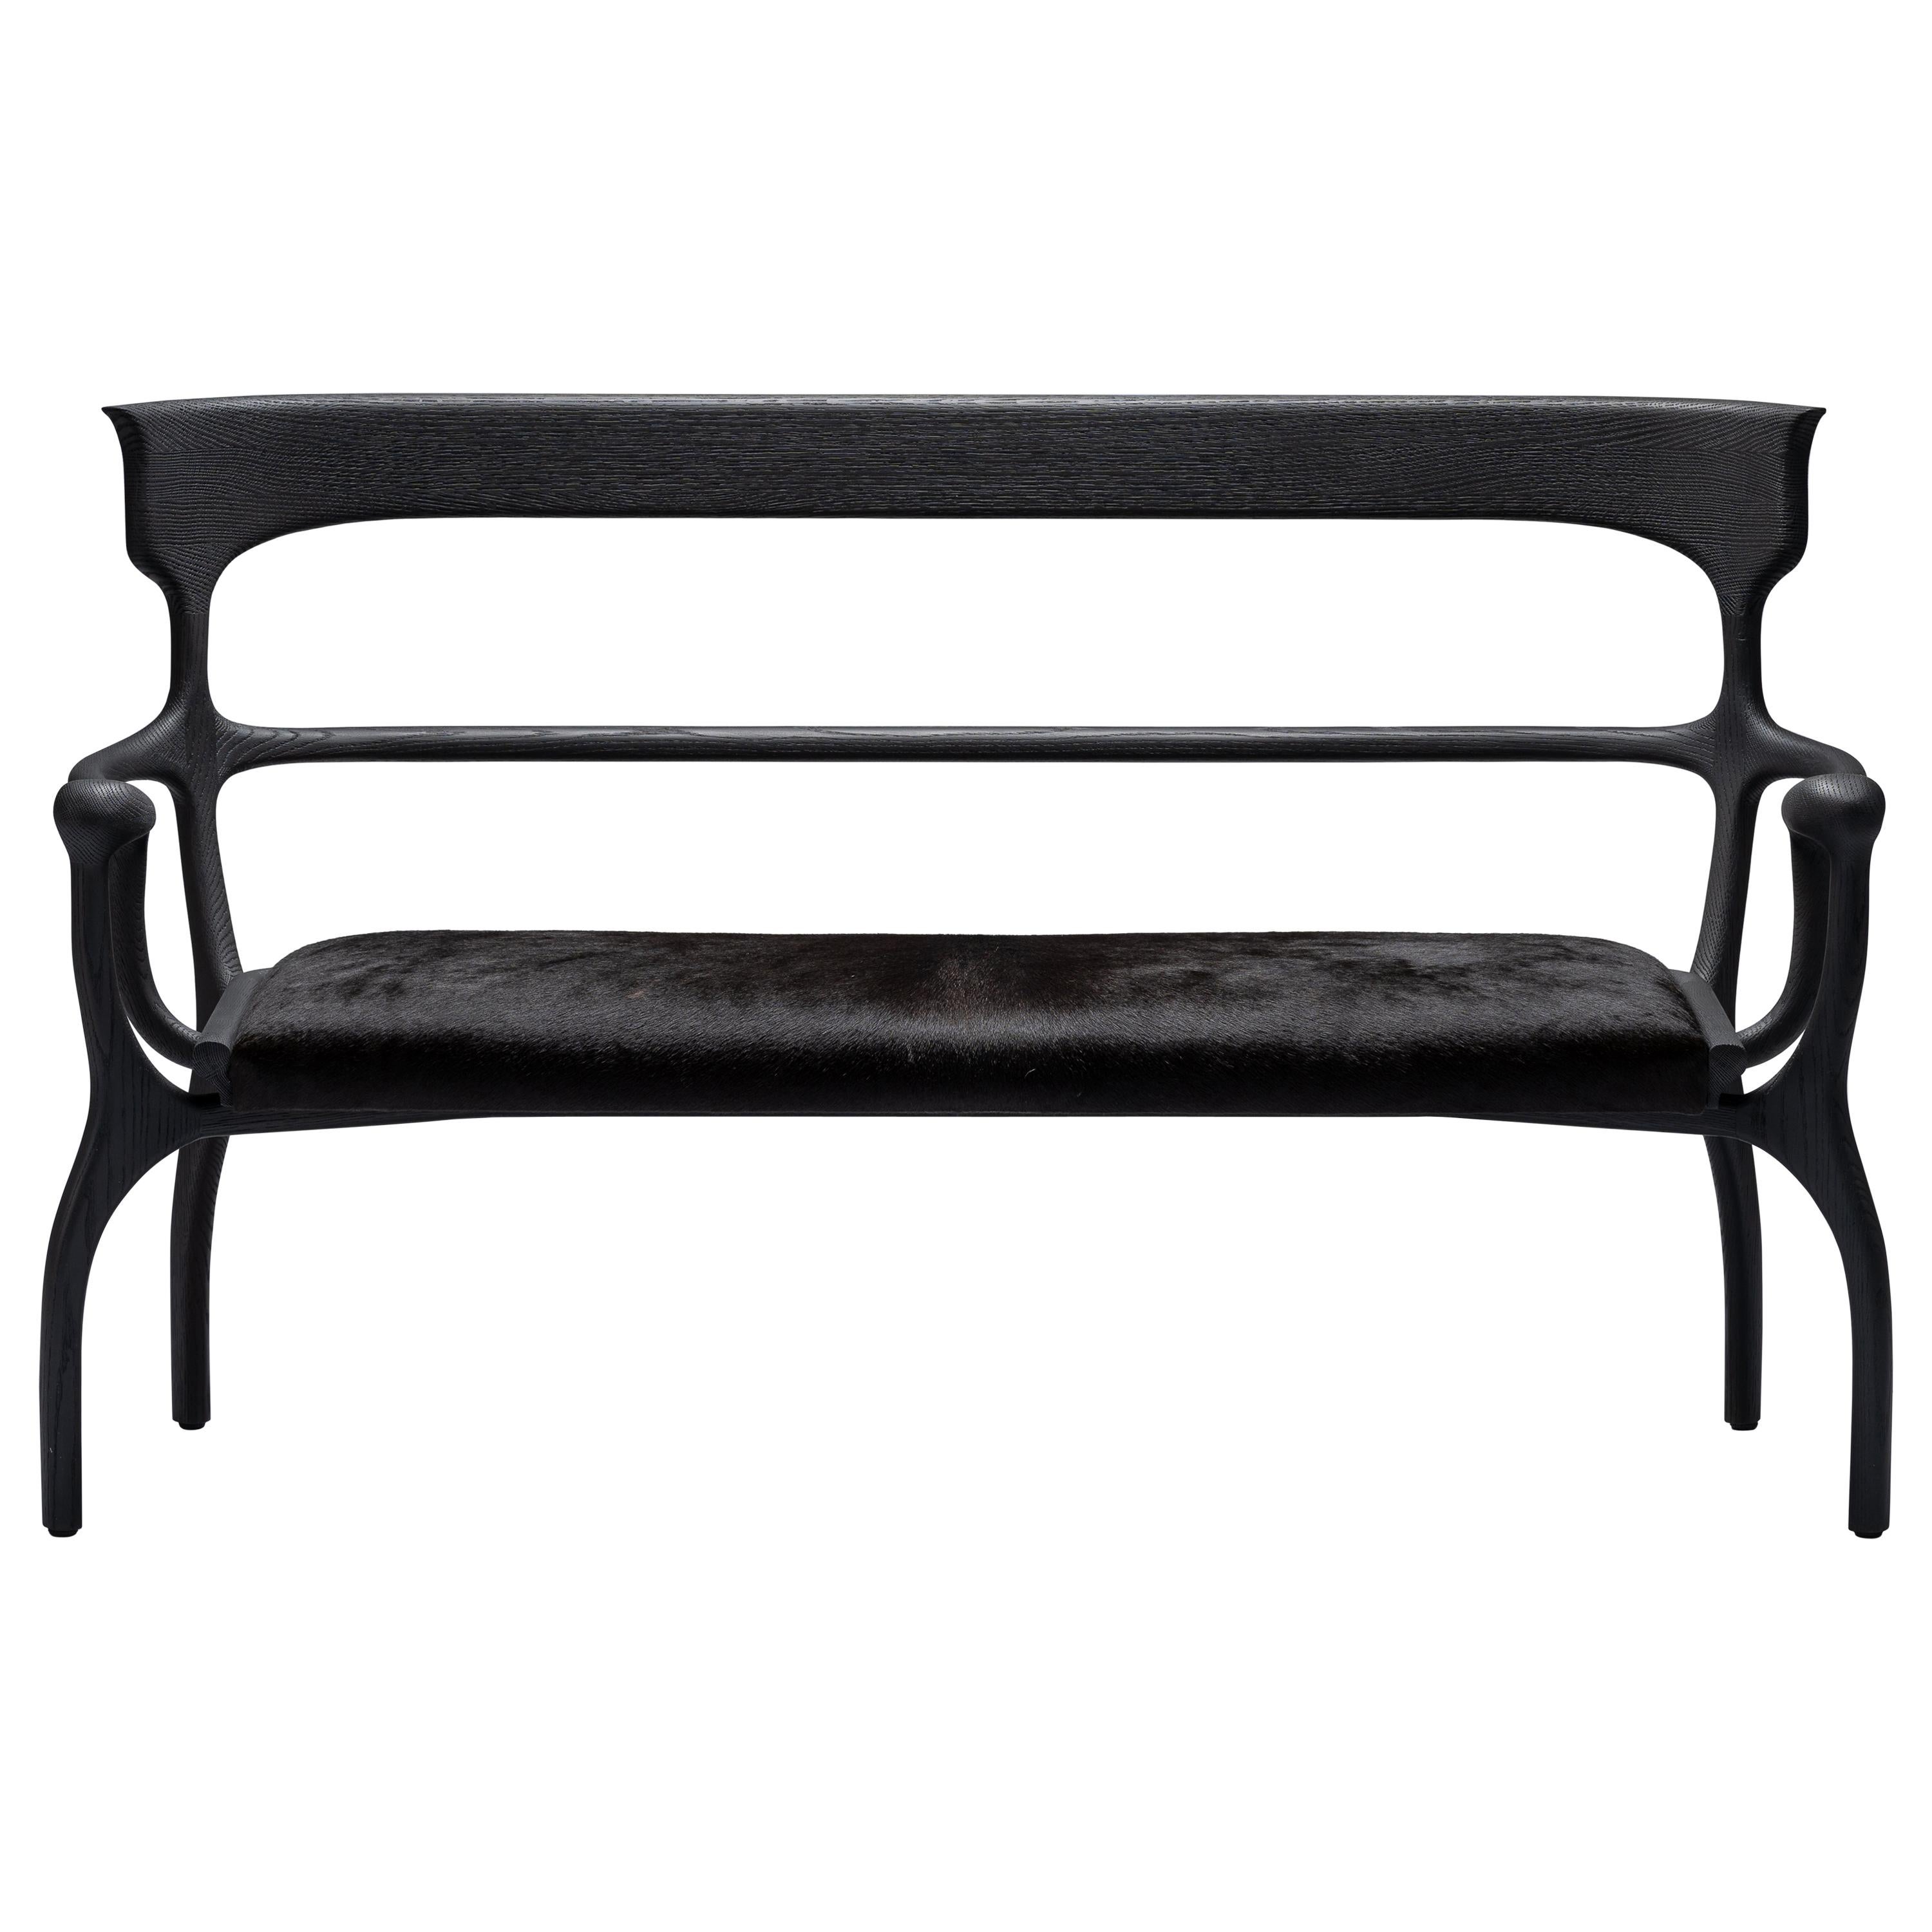 Marta Black Settee/Bench in Walnut/Oak with Leather/Cowhide Seat by Mandy Graham For Sale